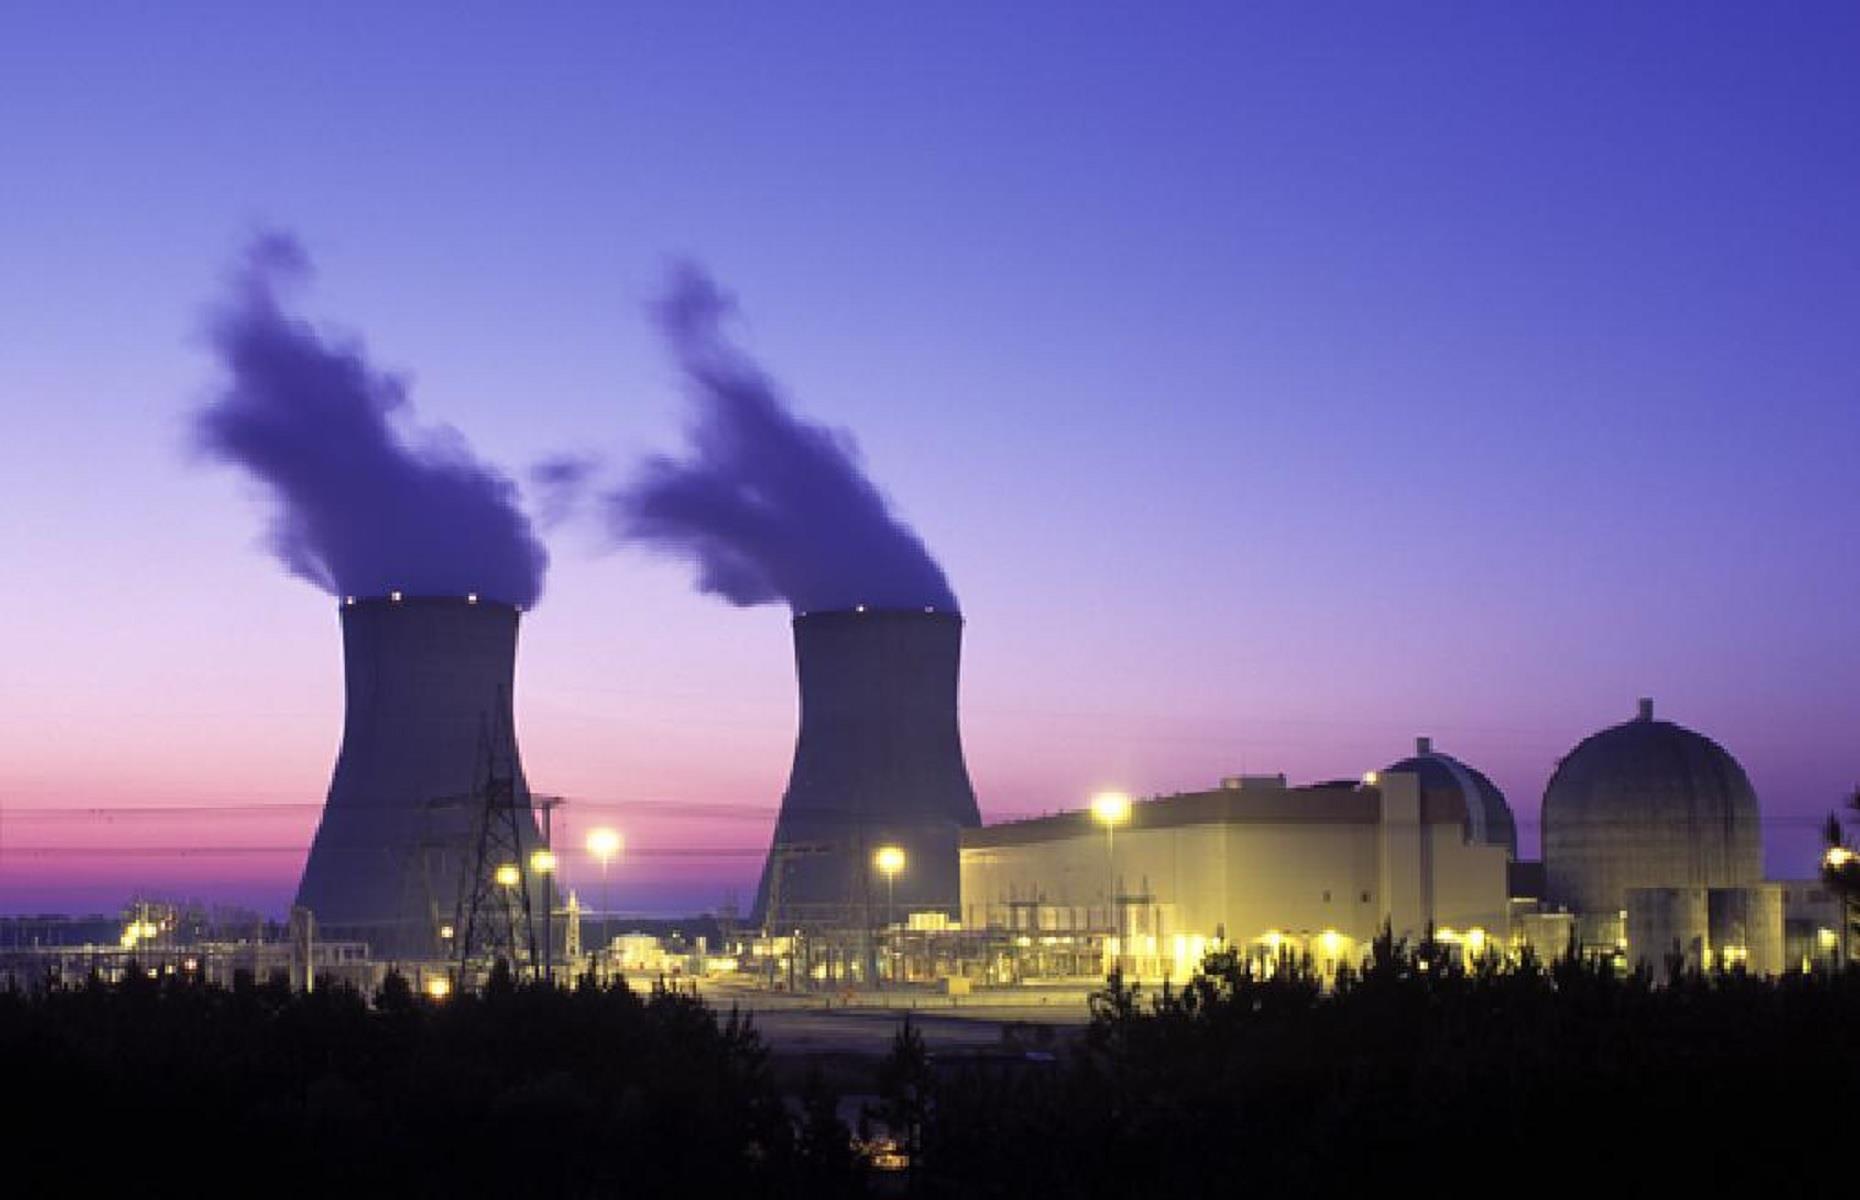 Vogtle Electric Generating Plant, USA: seven years late, over budget by $16 billion (£13bn) 